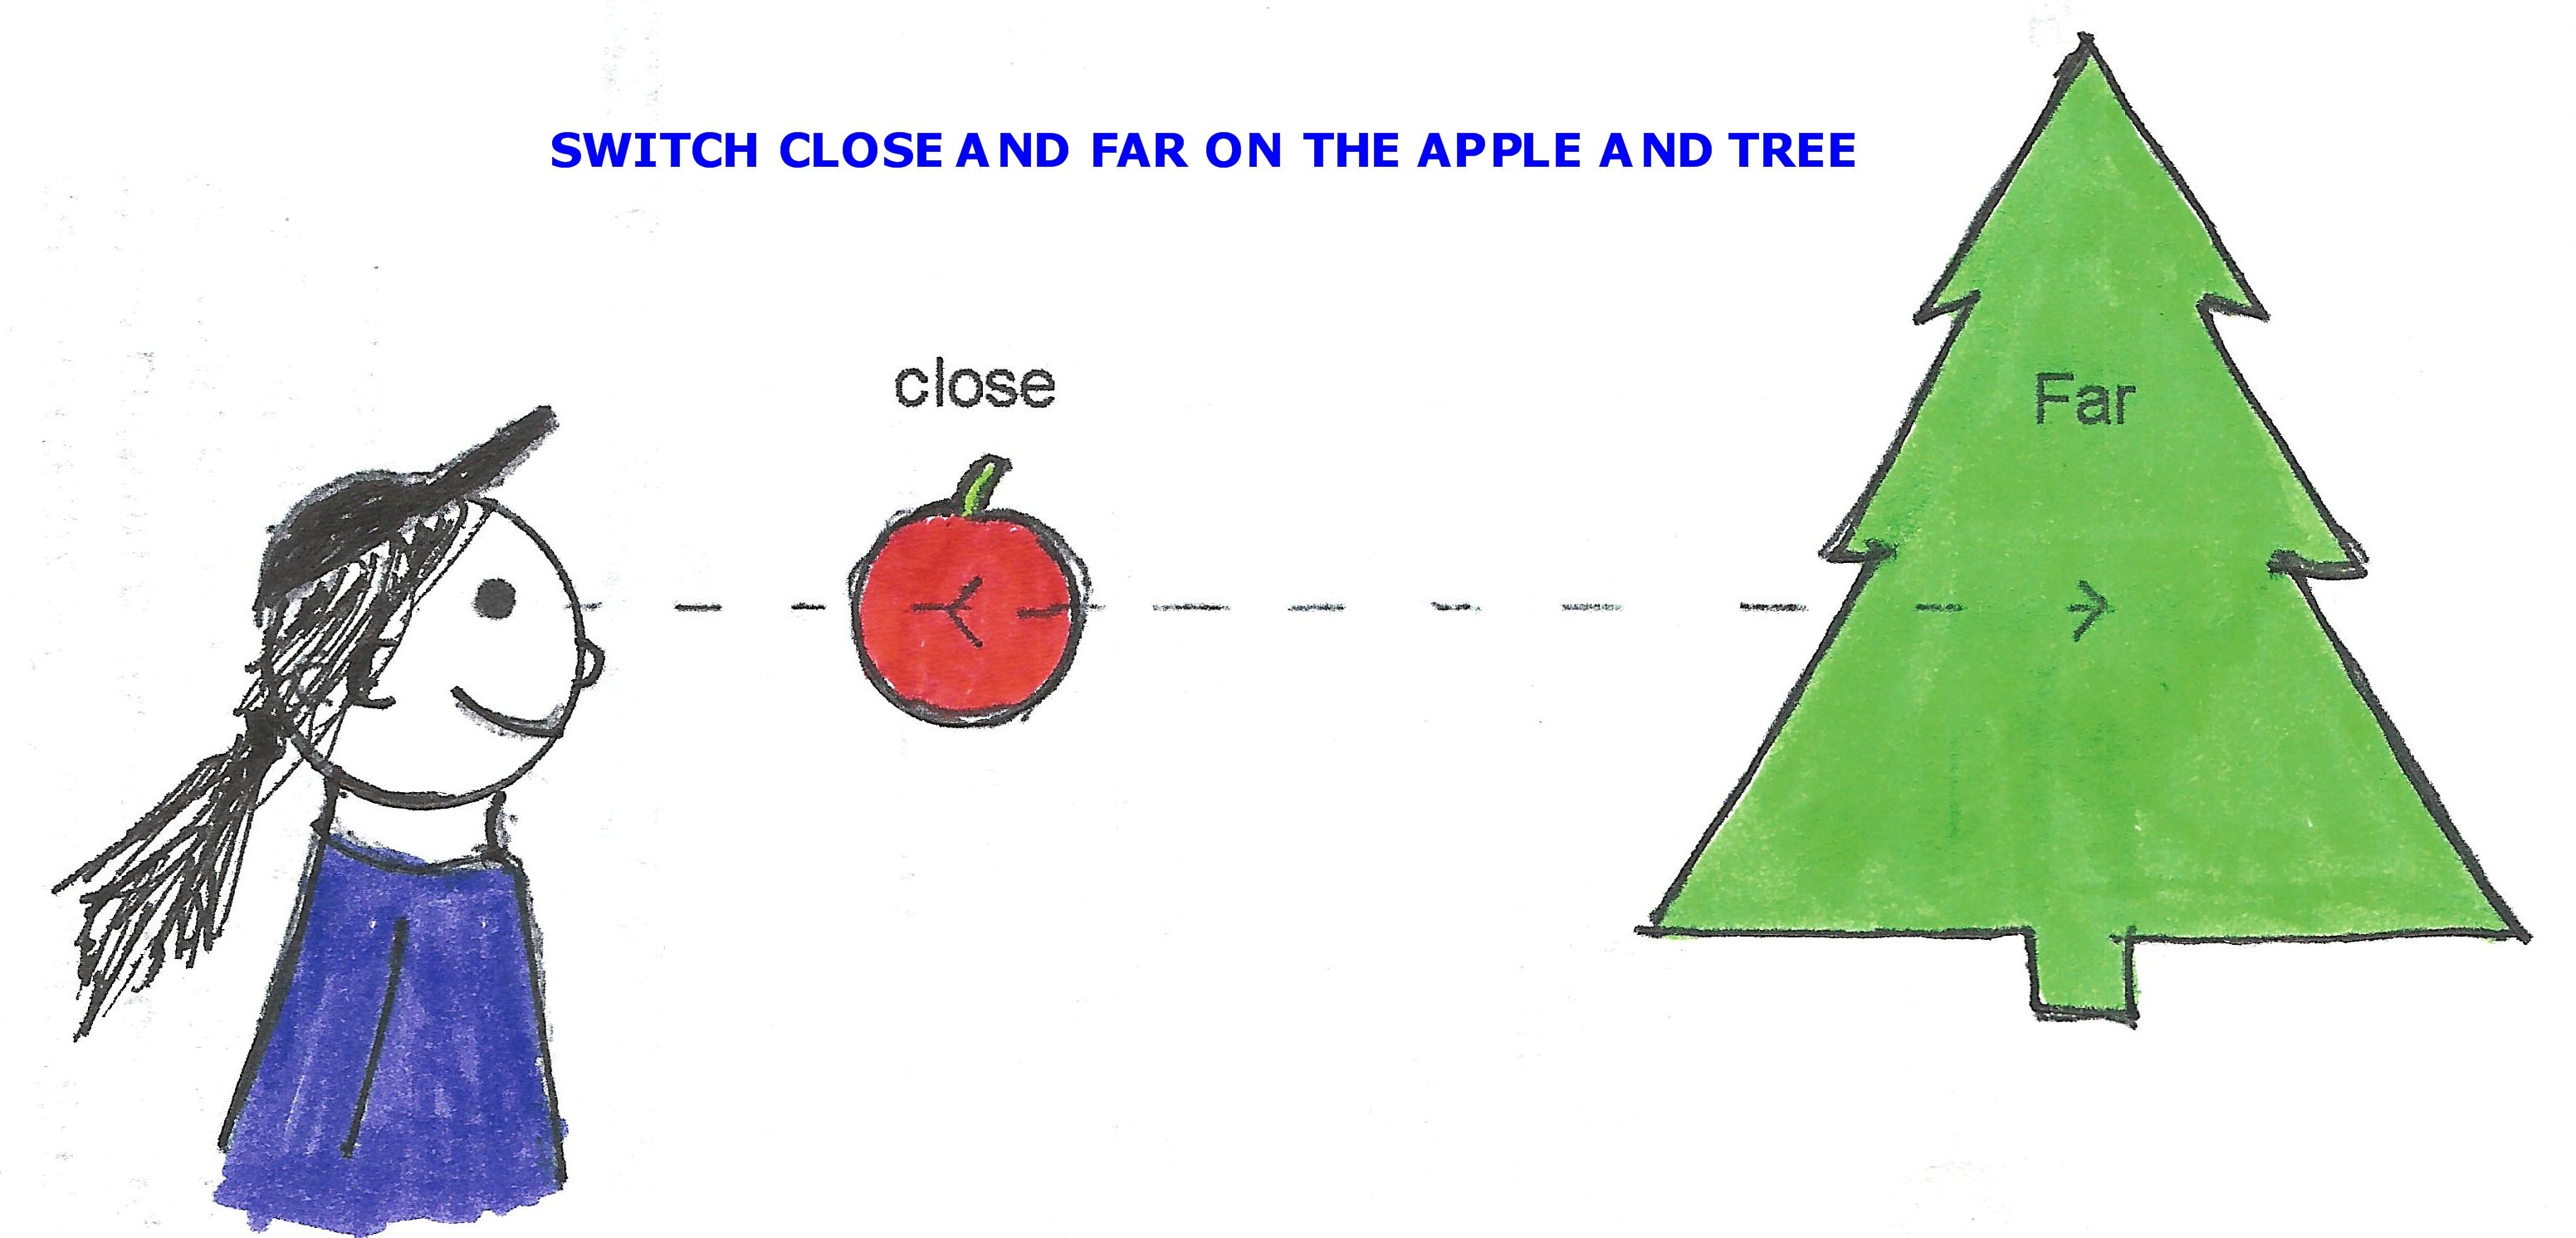 SWITCH CLOSE AND FAR ON THE APPLE AND TREE